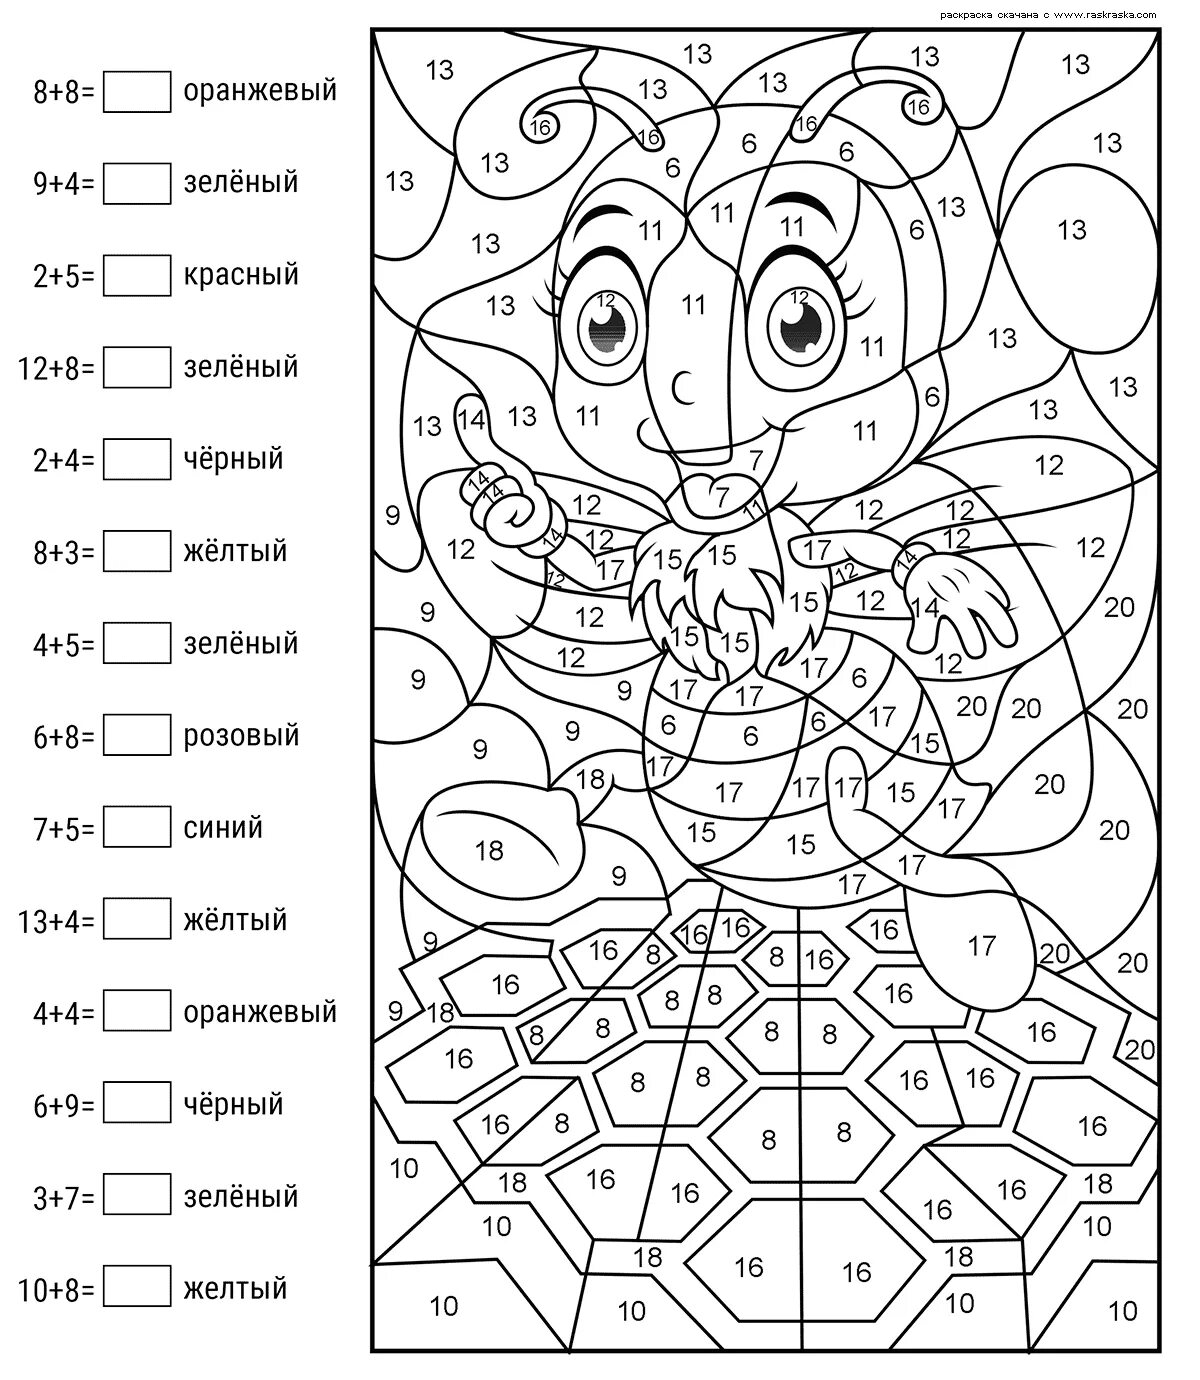 Examples of stylish coloring pages